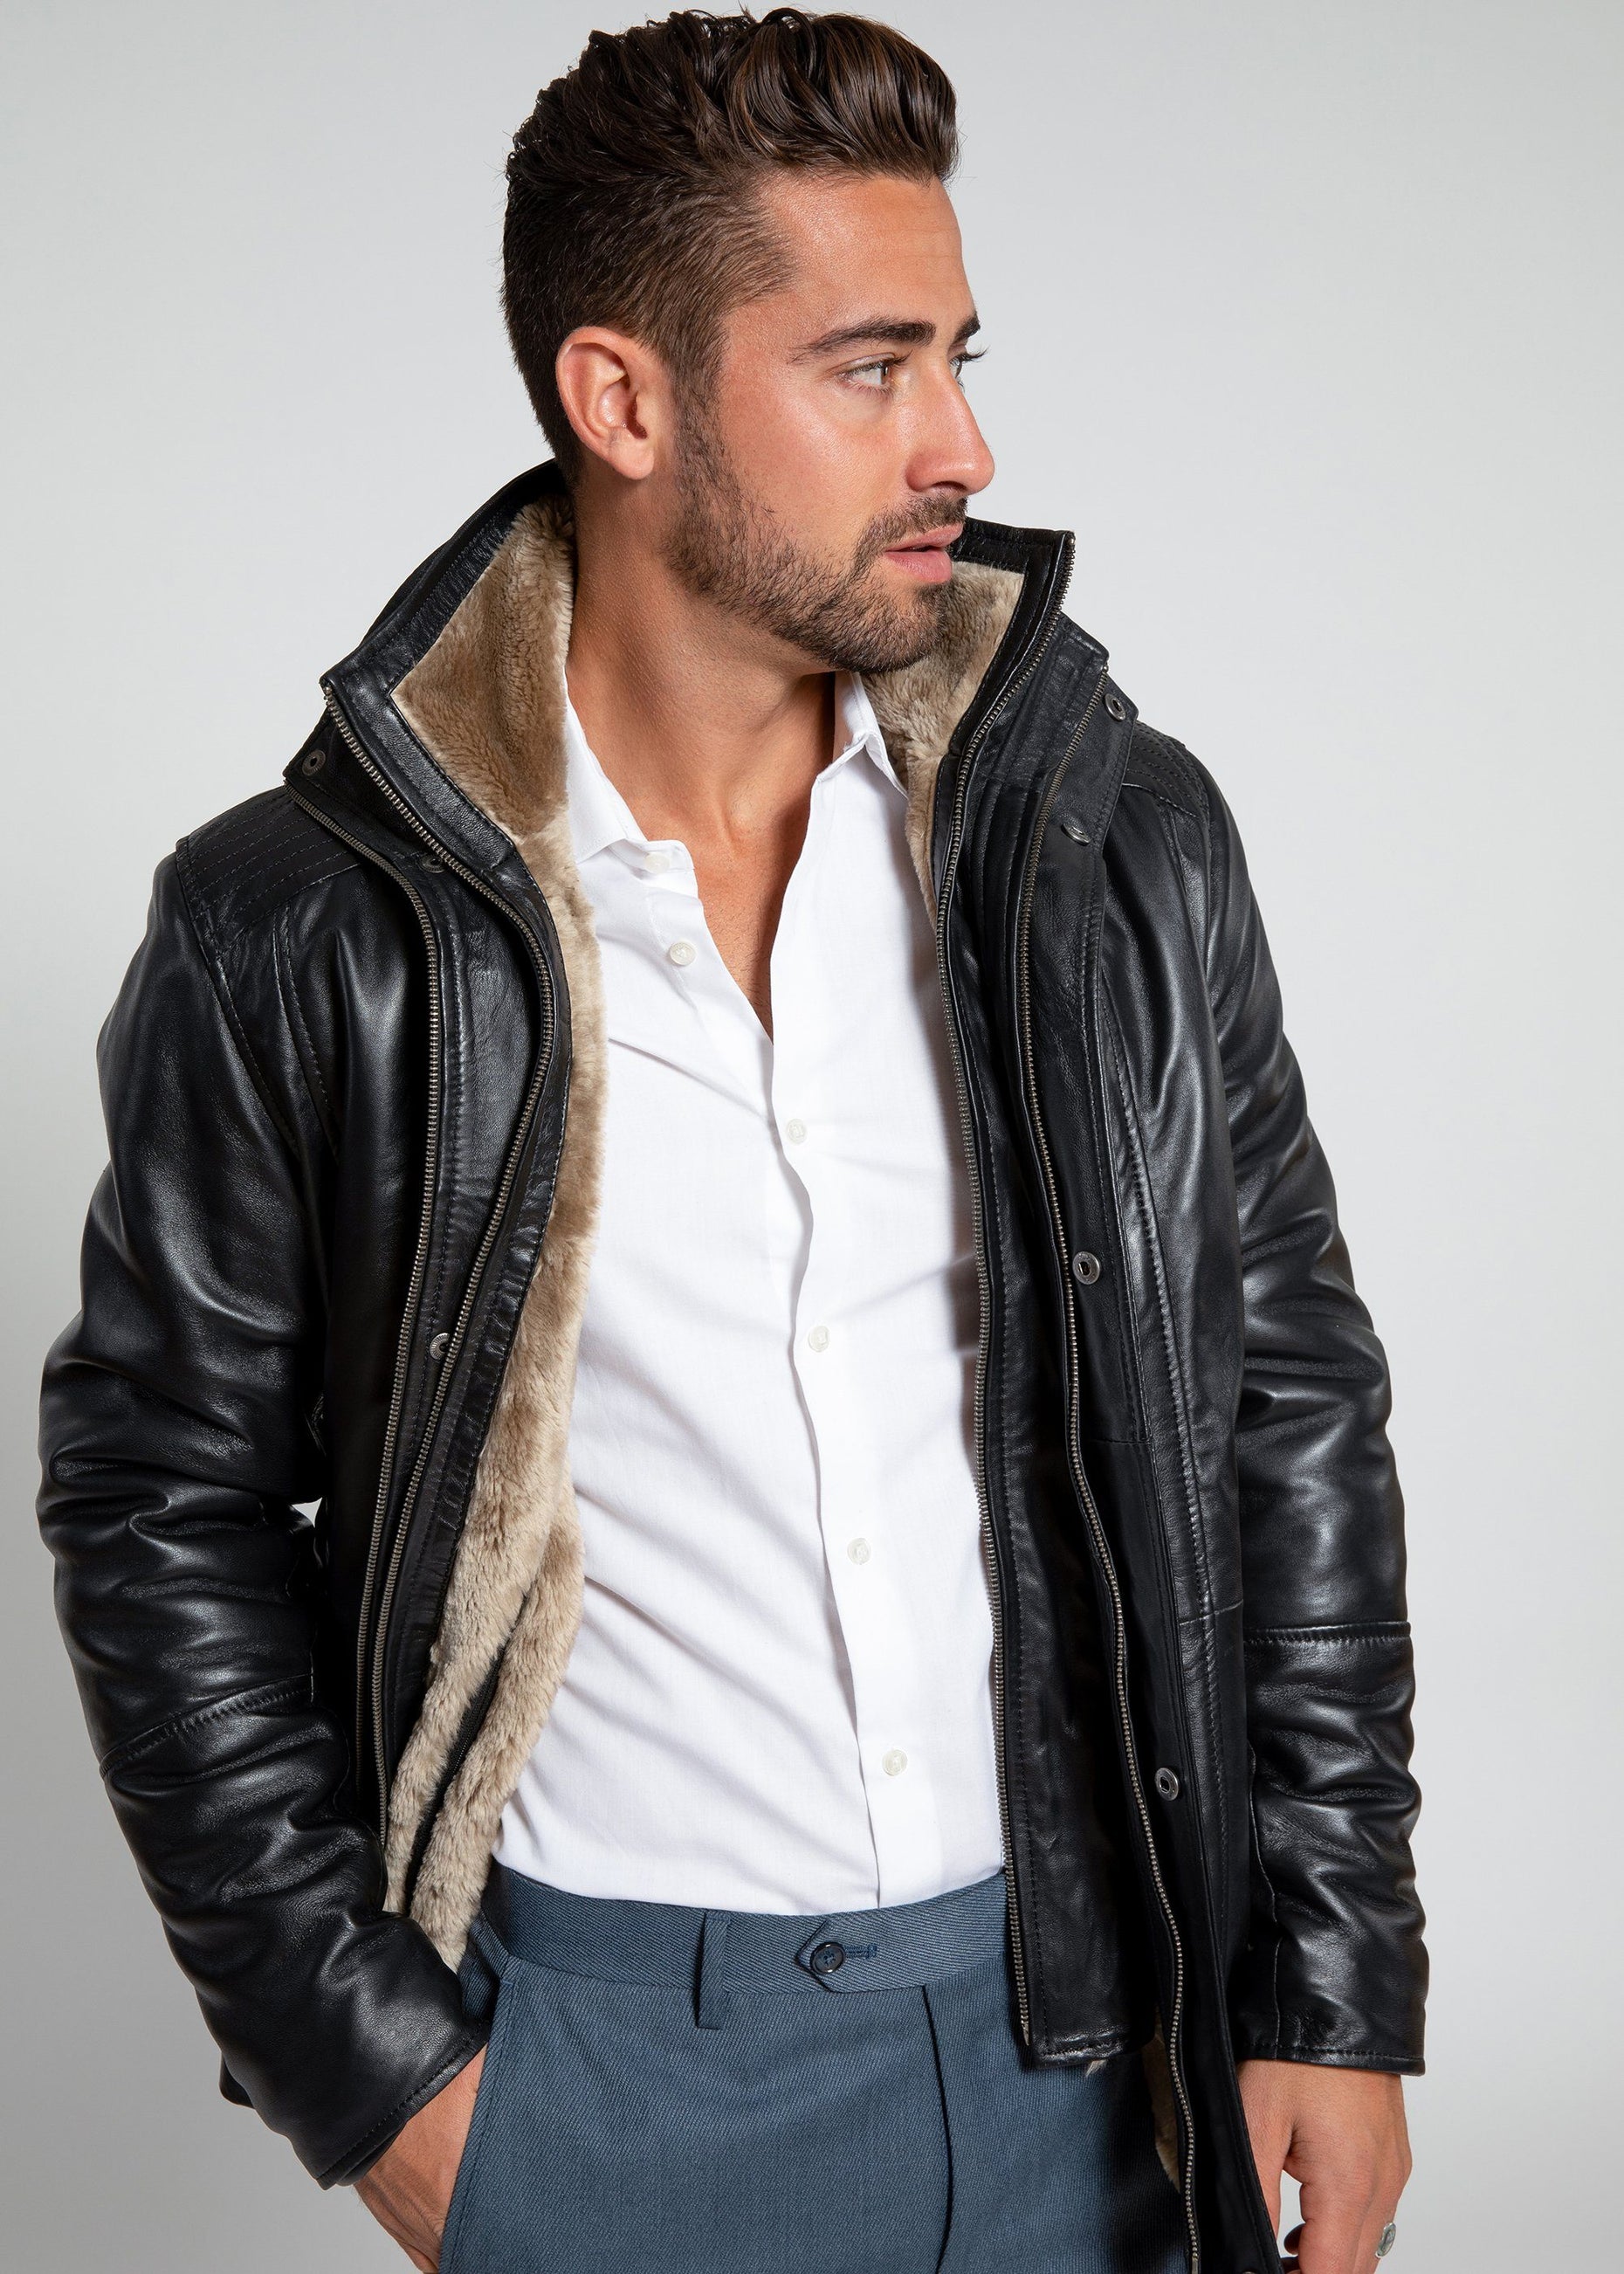 FADCLOSET: Leather Jackets & Outerwear for Women and Men